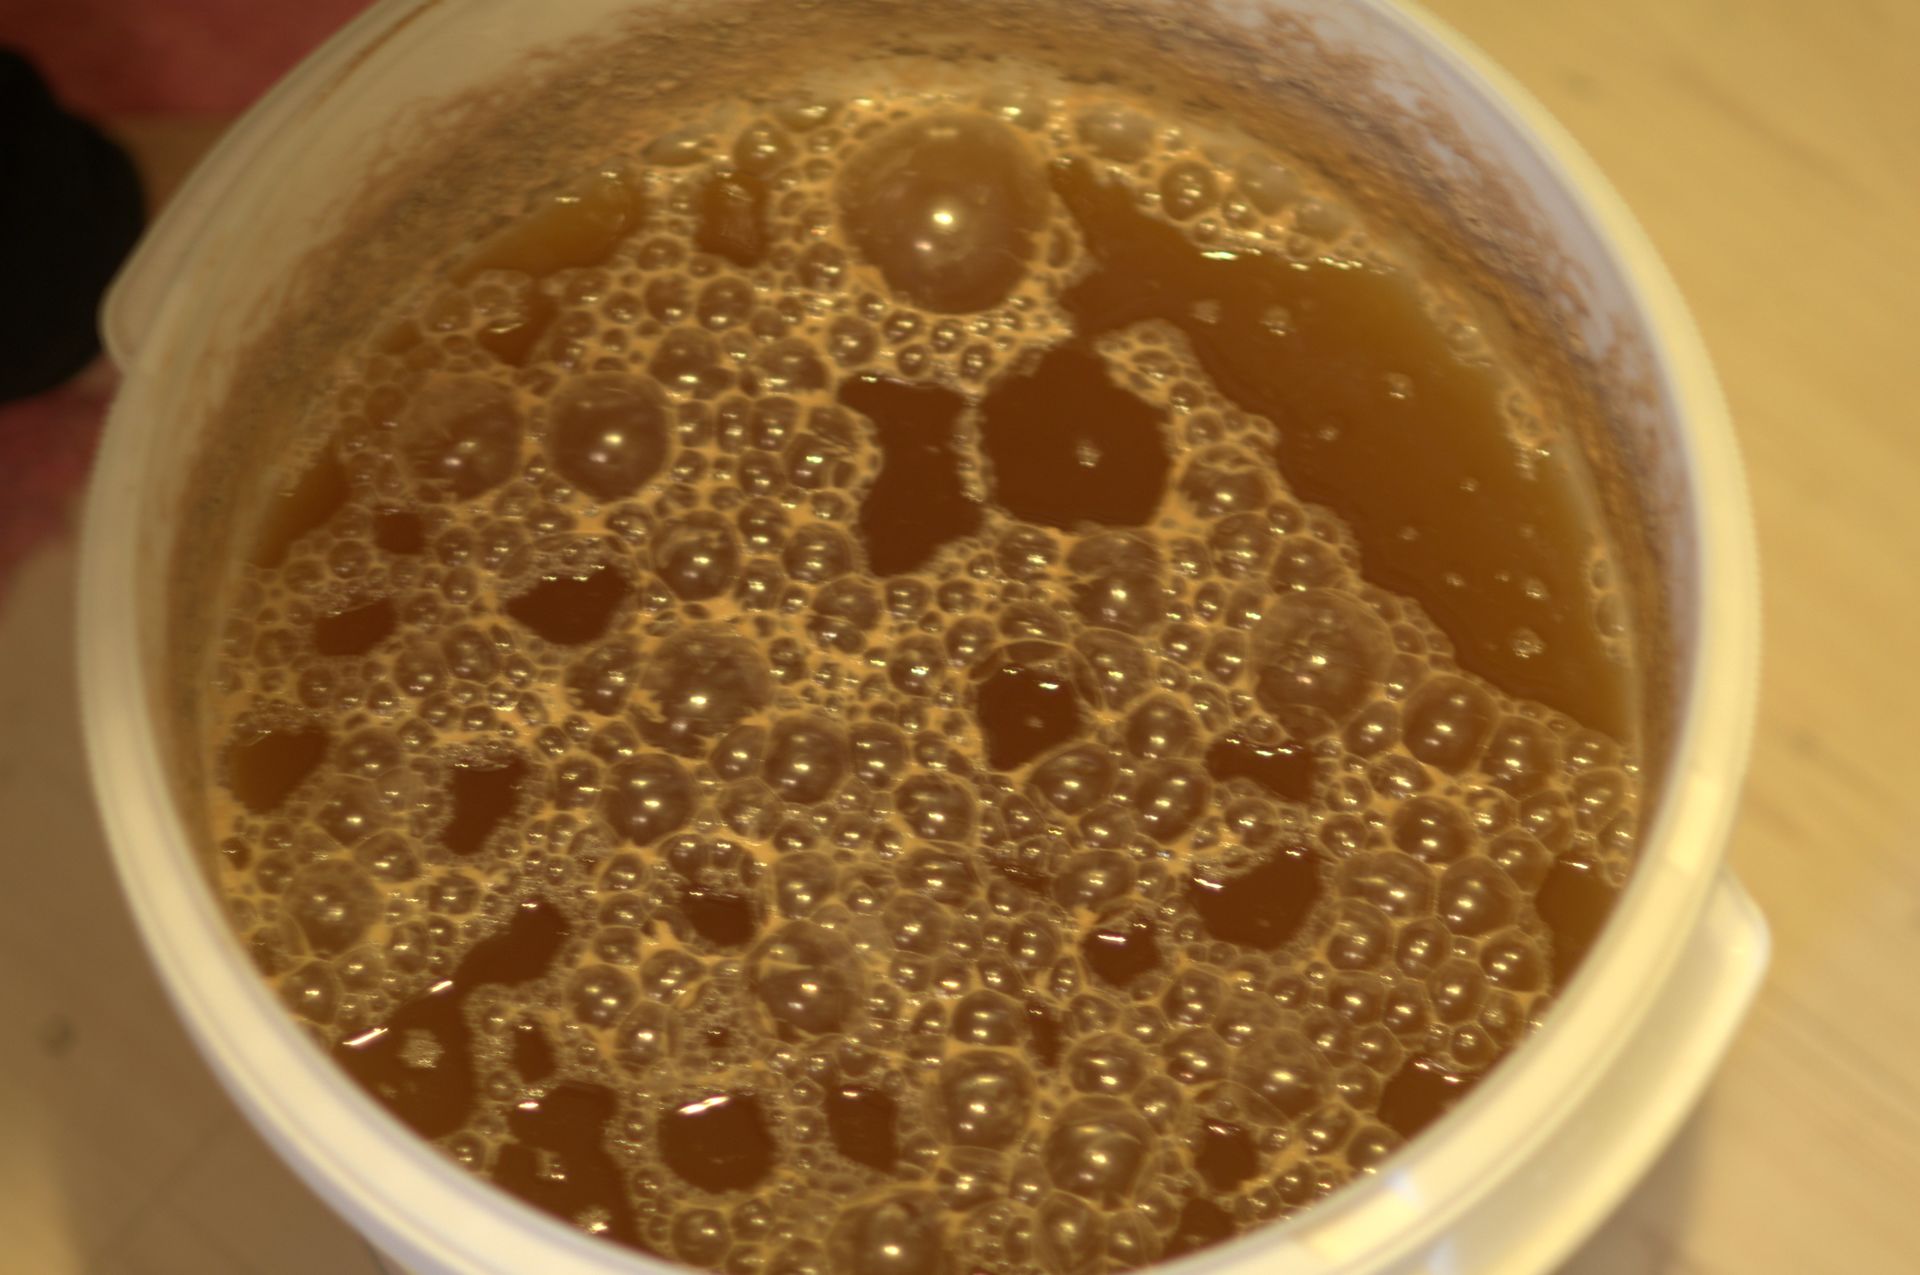 A lambic without pellicles. What gives?